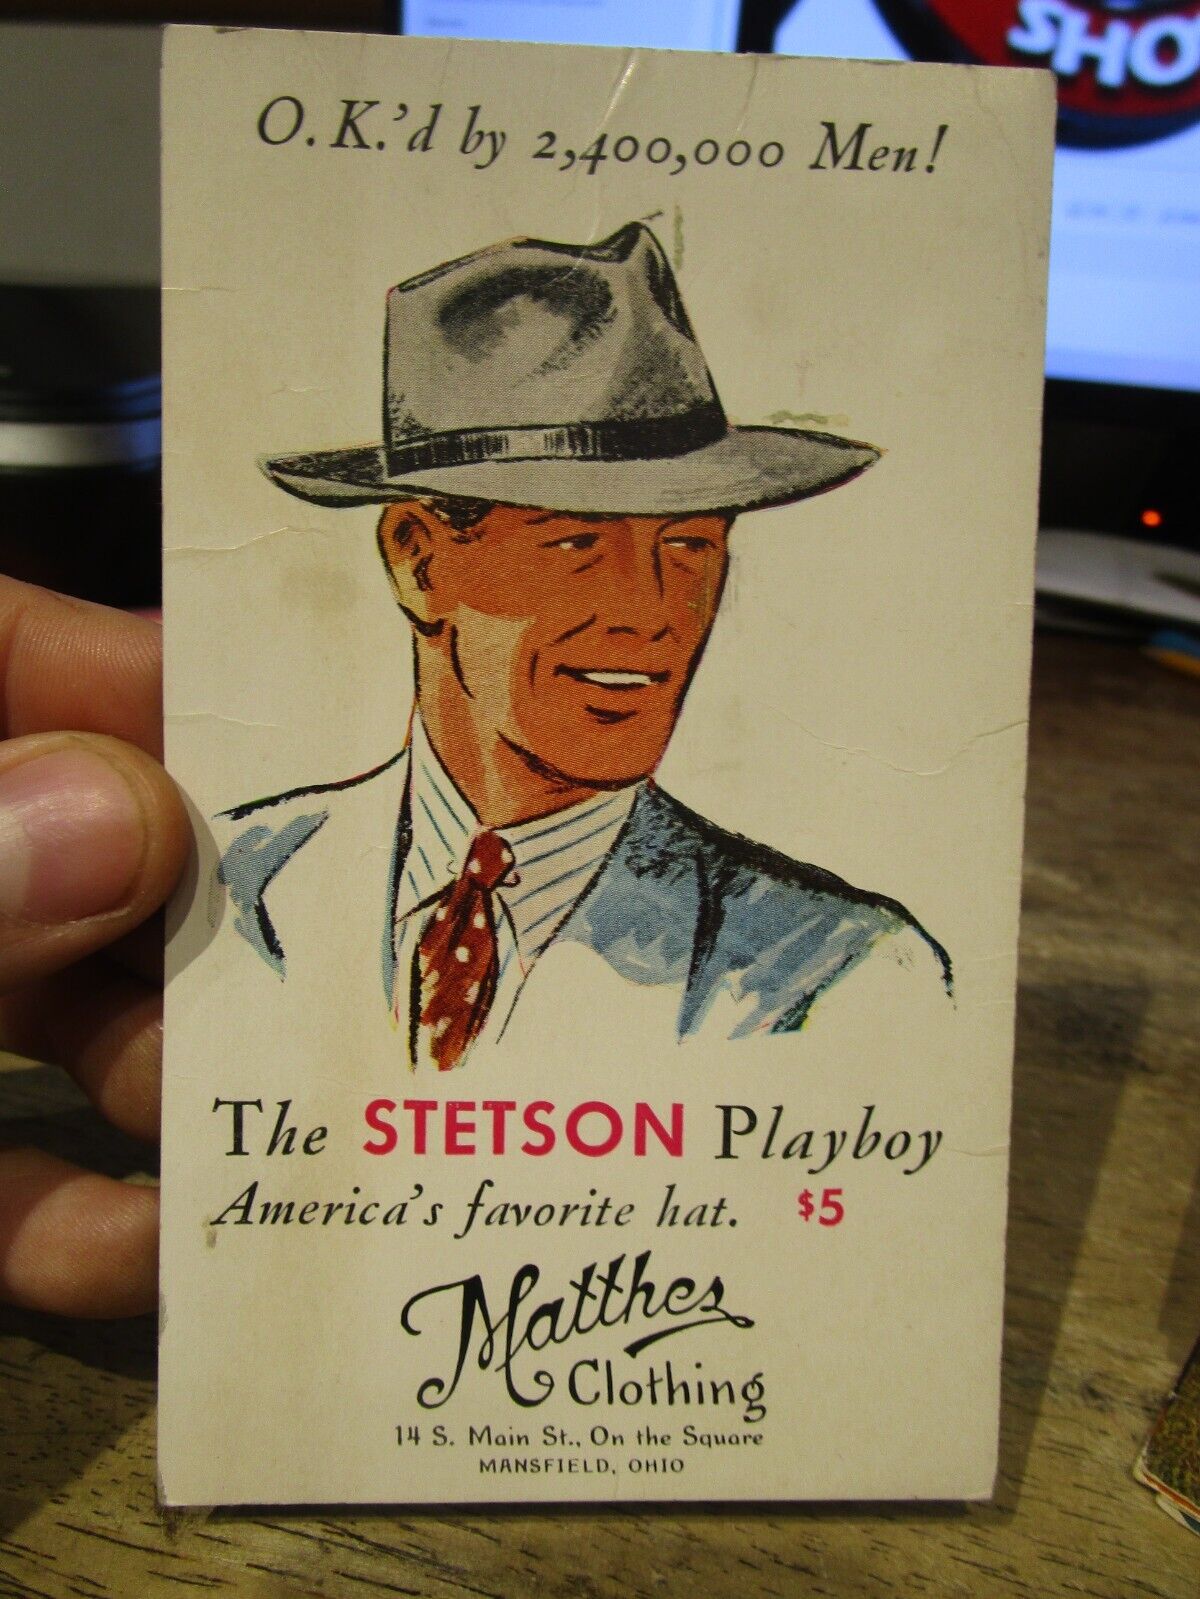 G1 Old MANSFIELD OHIO Postcard Matthes Clothing Mens Store Stetson Playboy Hats